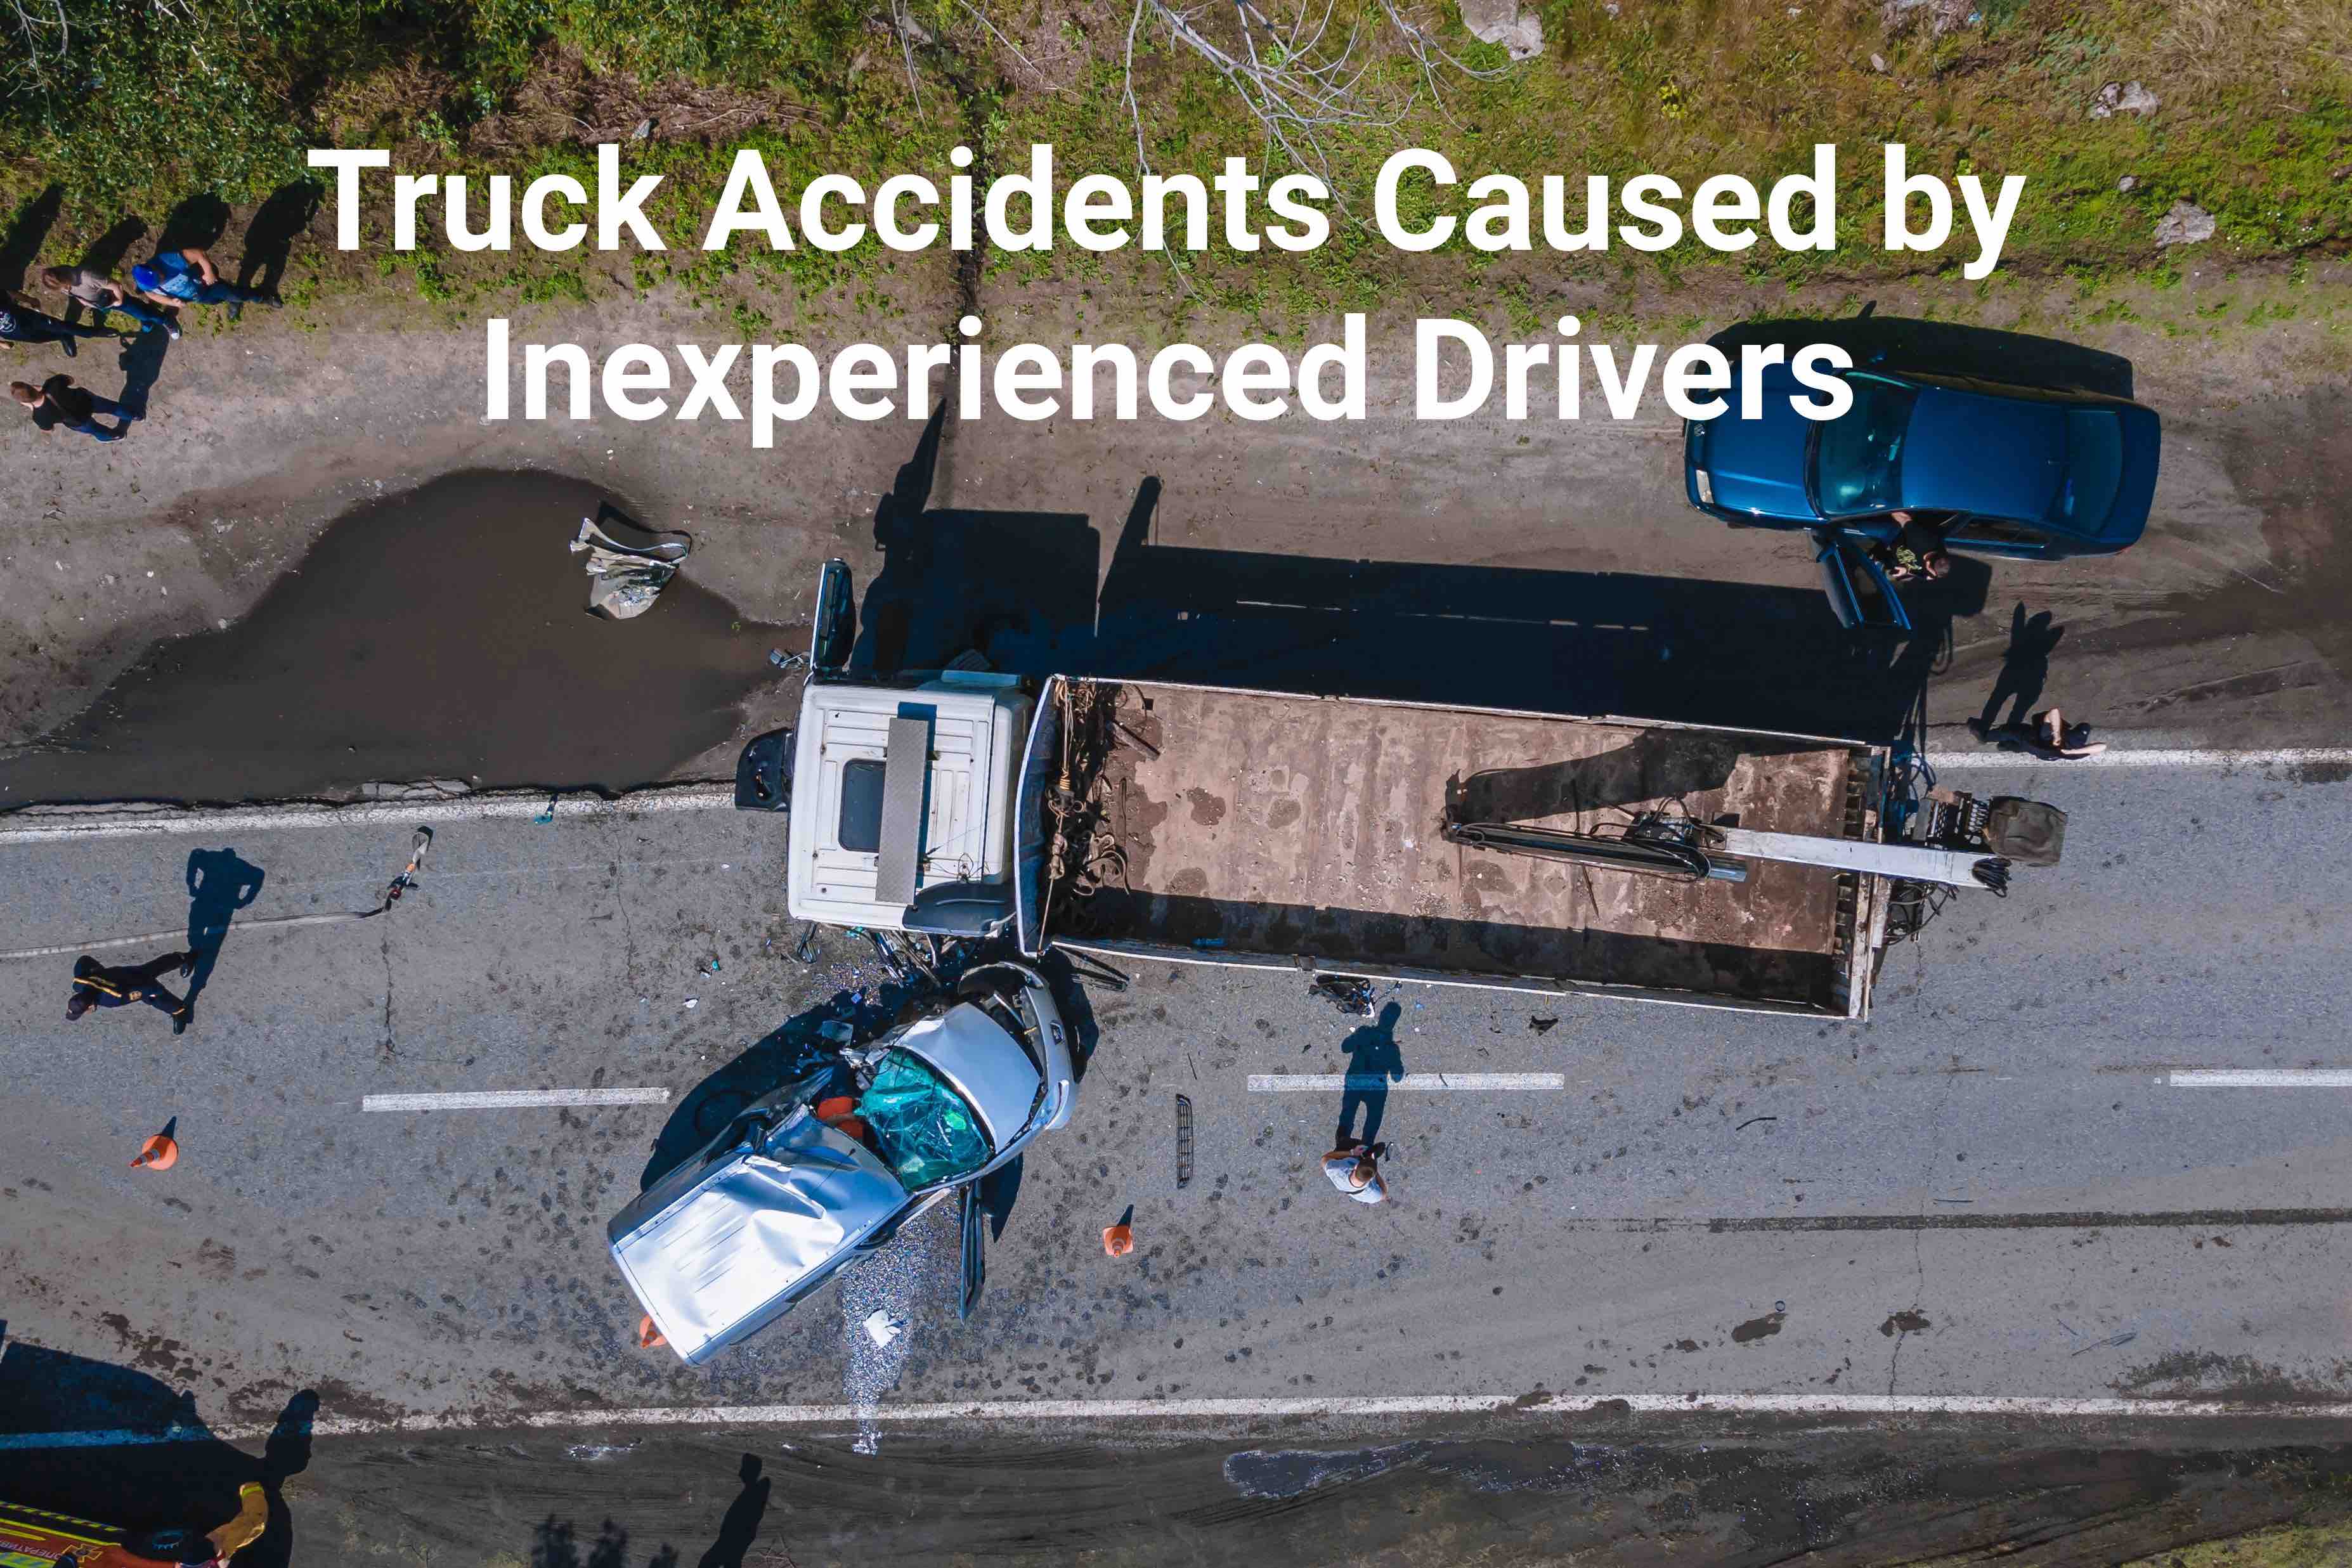 Trucking accidents caused by inexperienced drivers